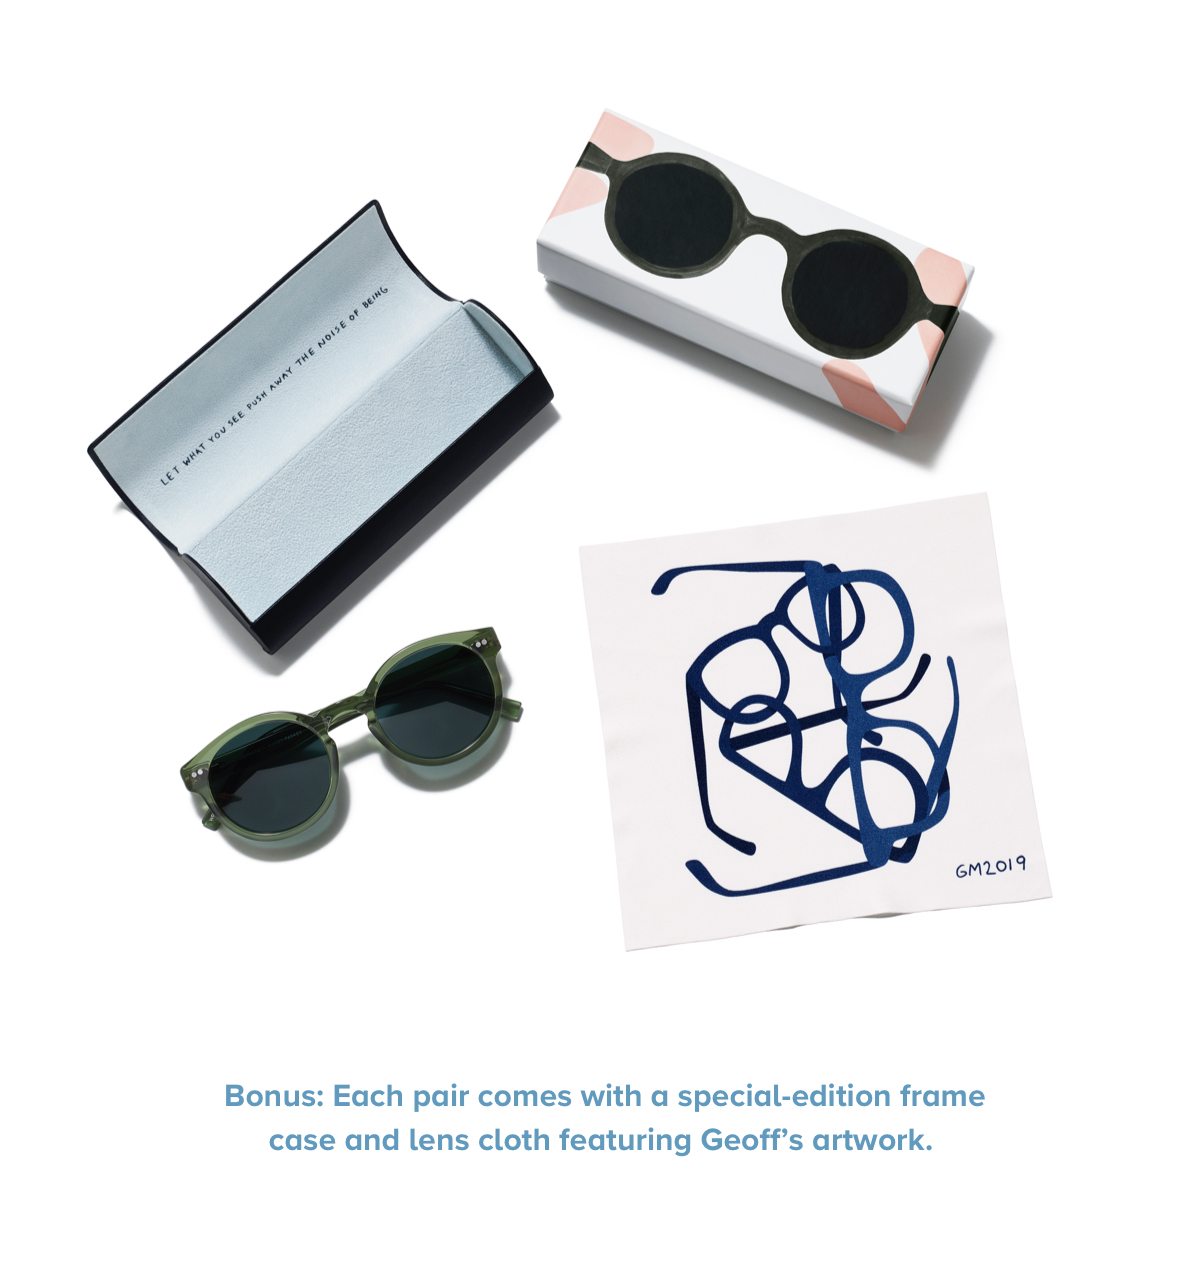 Bonus: Each pair comes with a special-edition frame case and lens cloth featuring Geoff’s artwork.